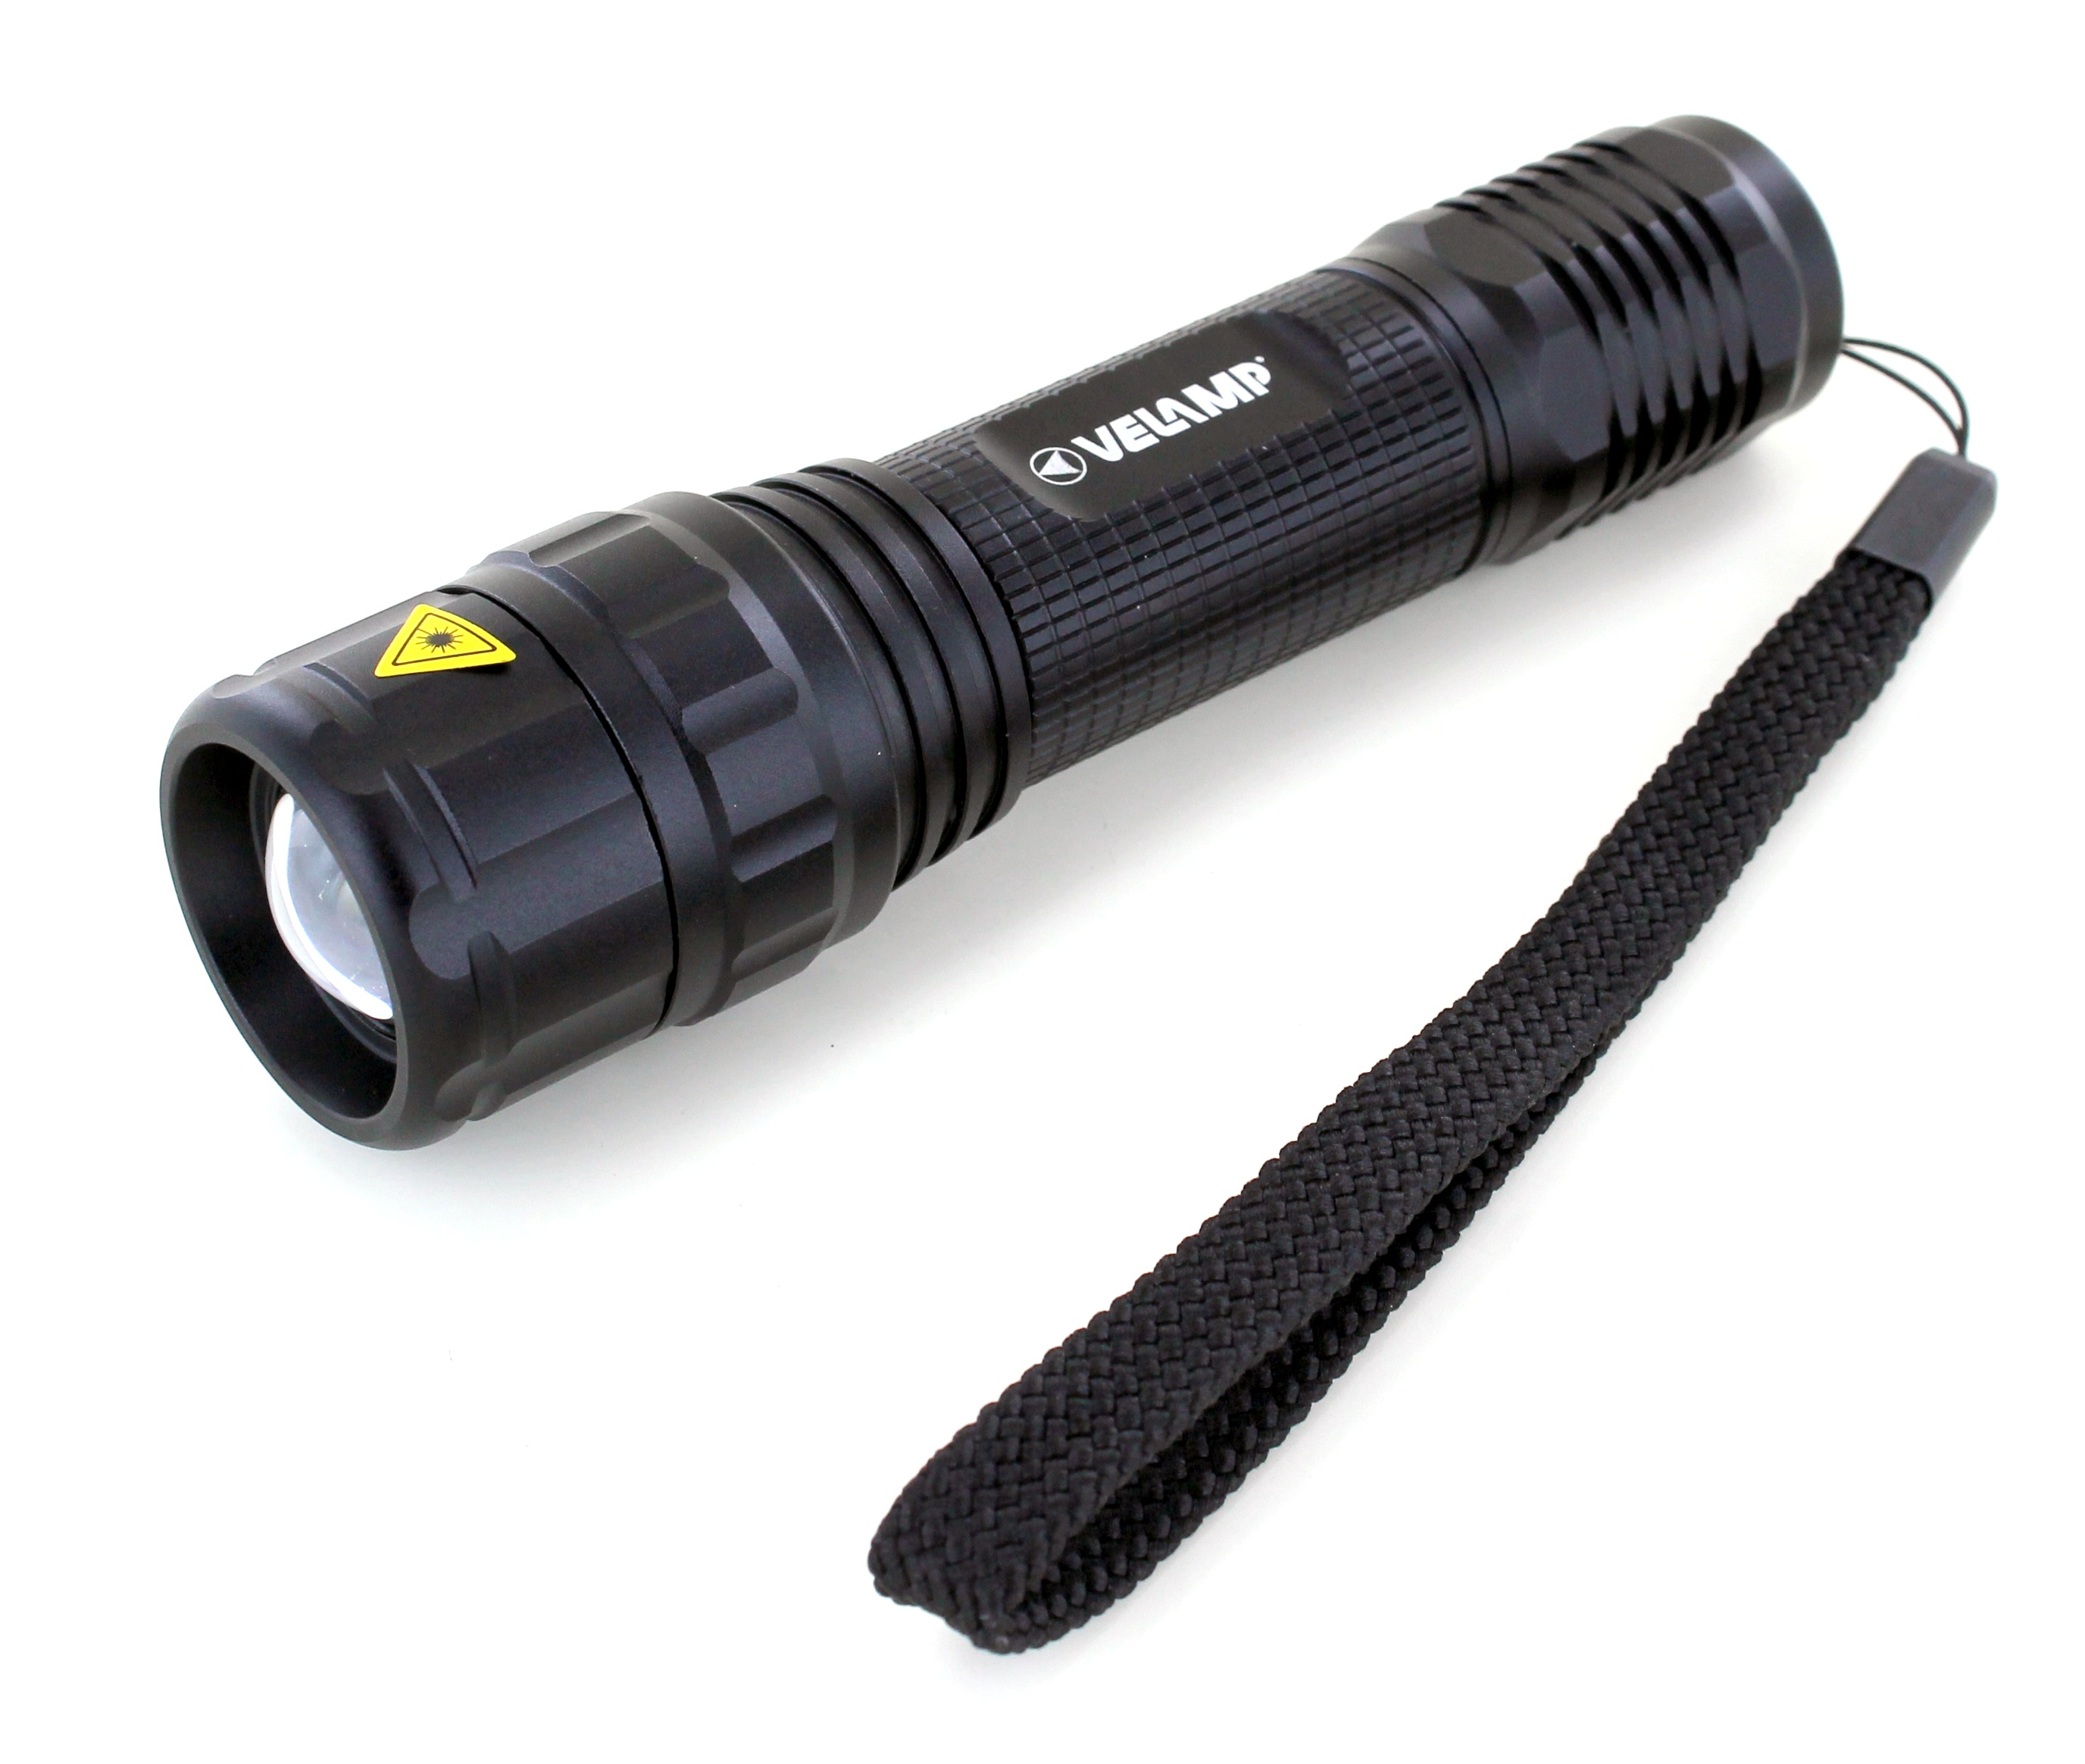 Lampe torche LED rechargeable CREE 10W zoom -PANTHER 